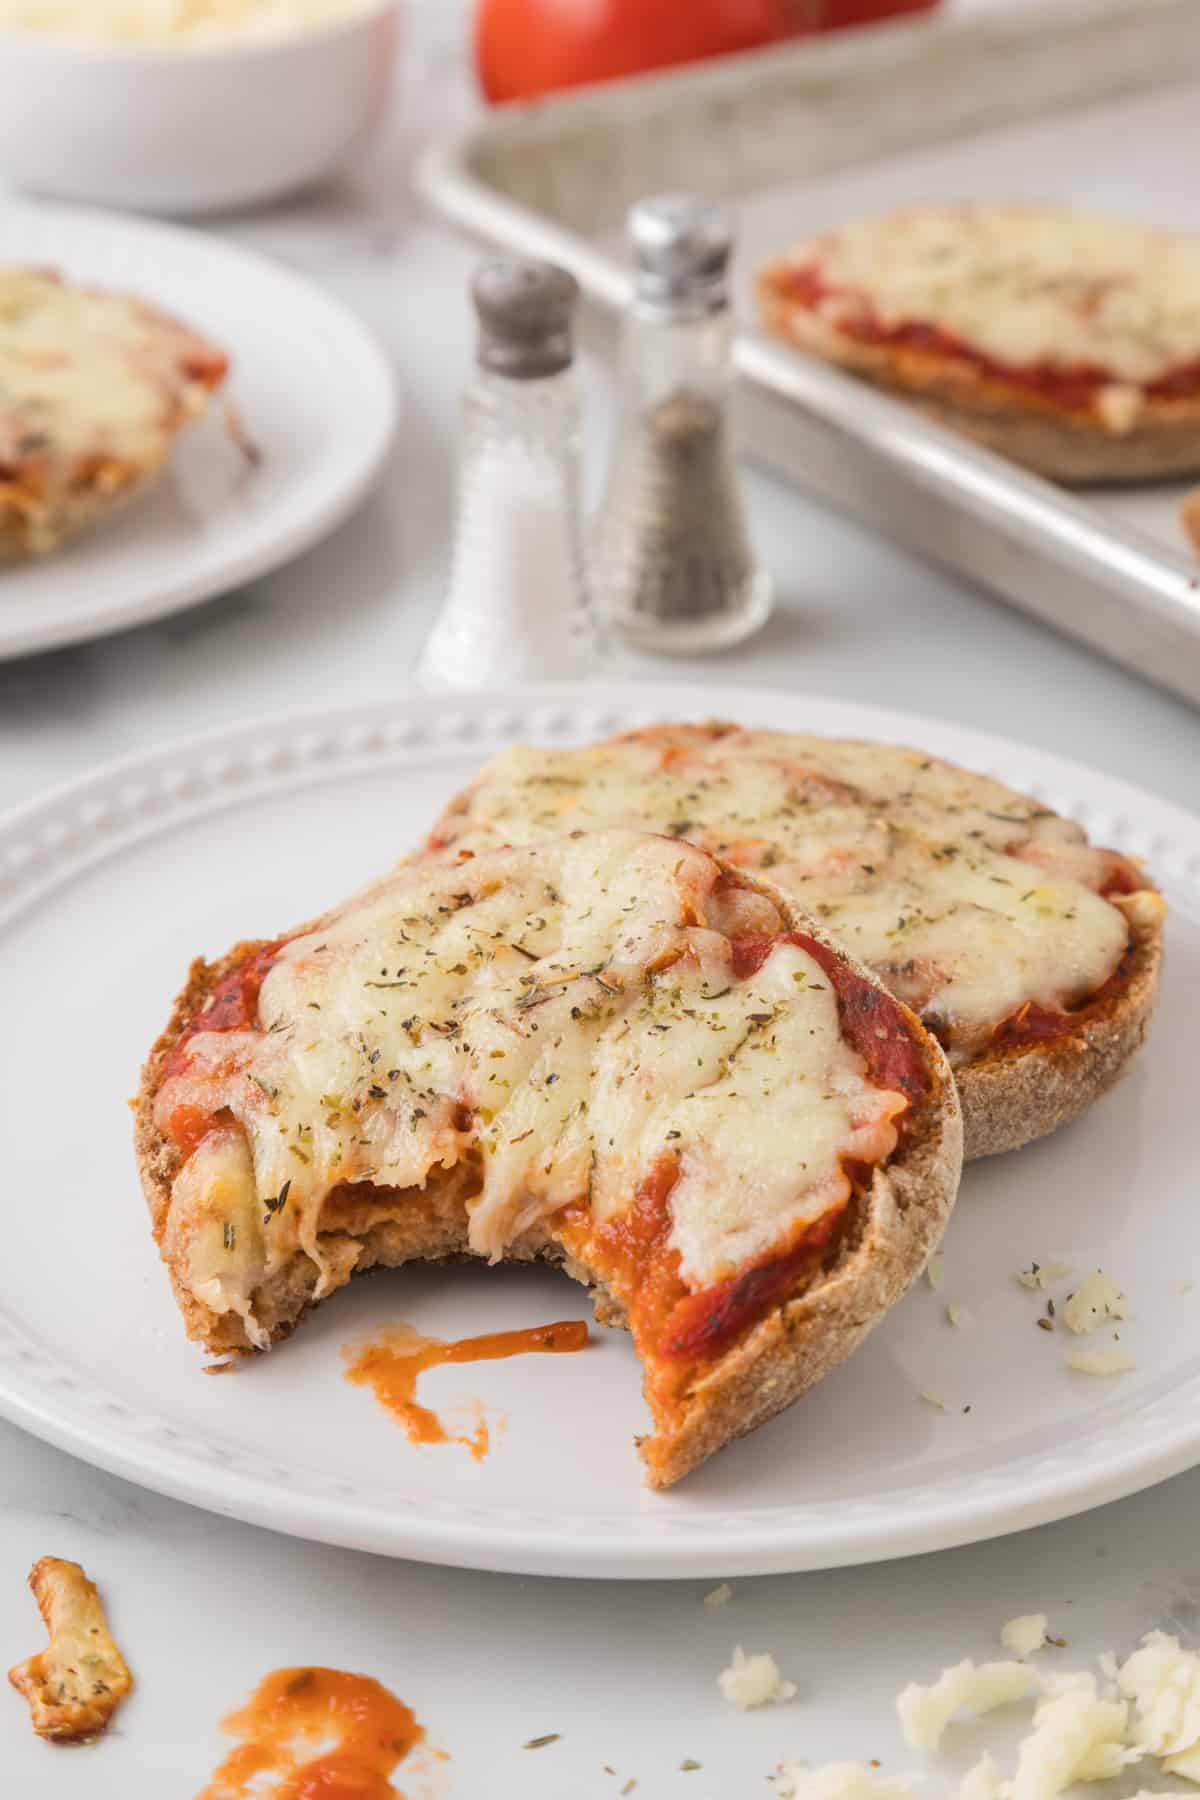 Two halves of English muffin pizza on a plate next to a bowl of sauce.